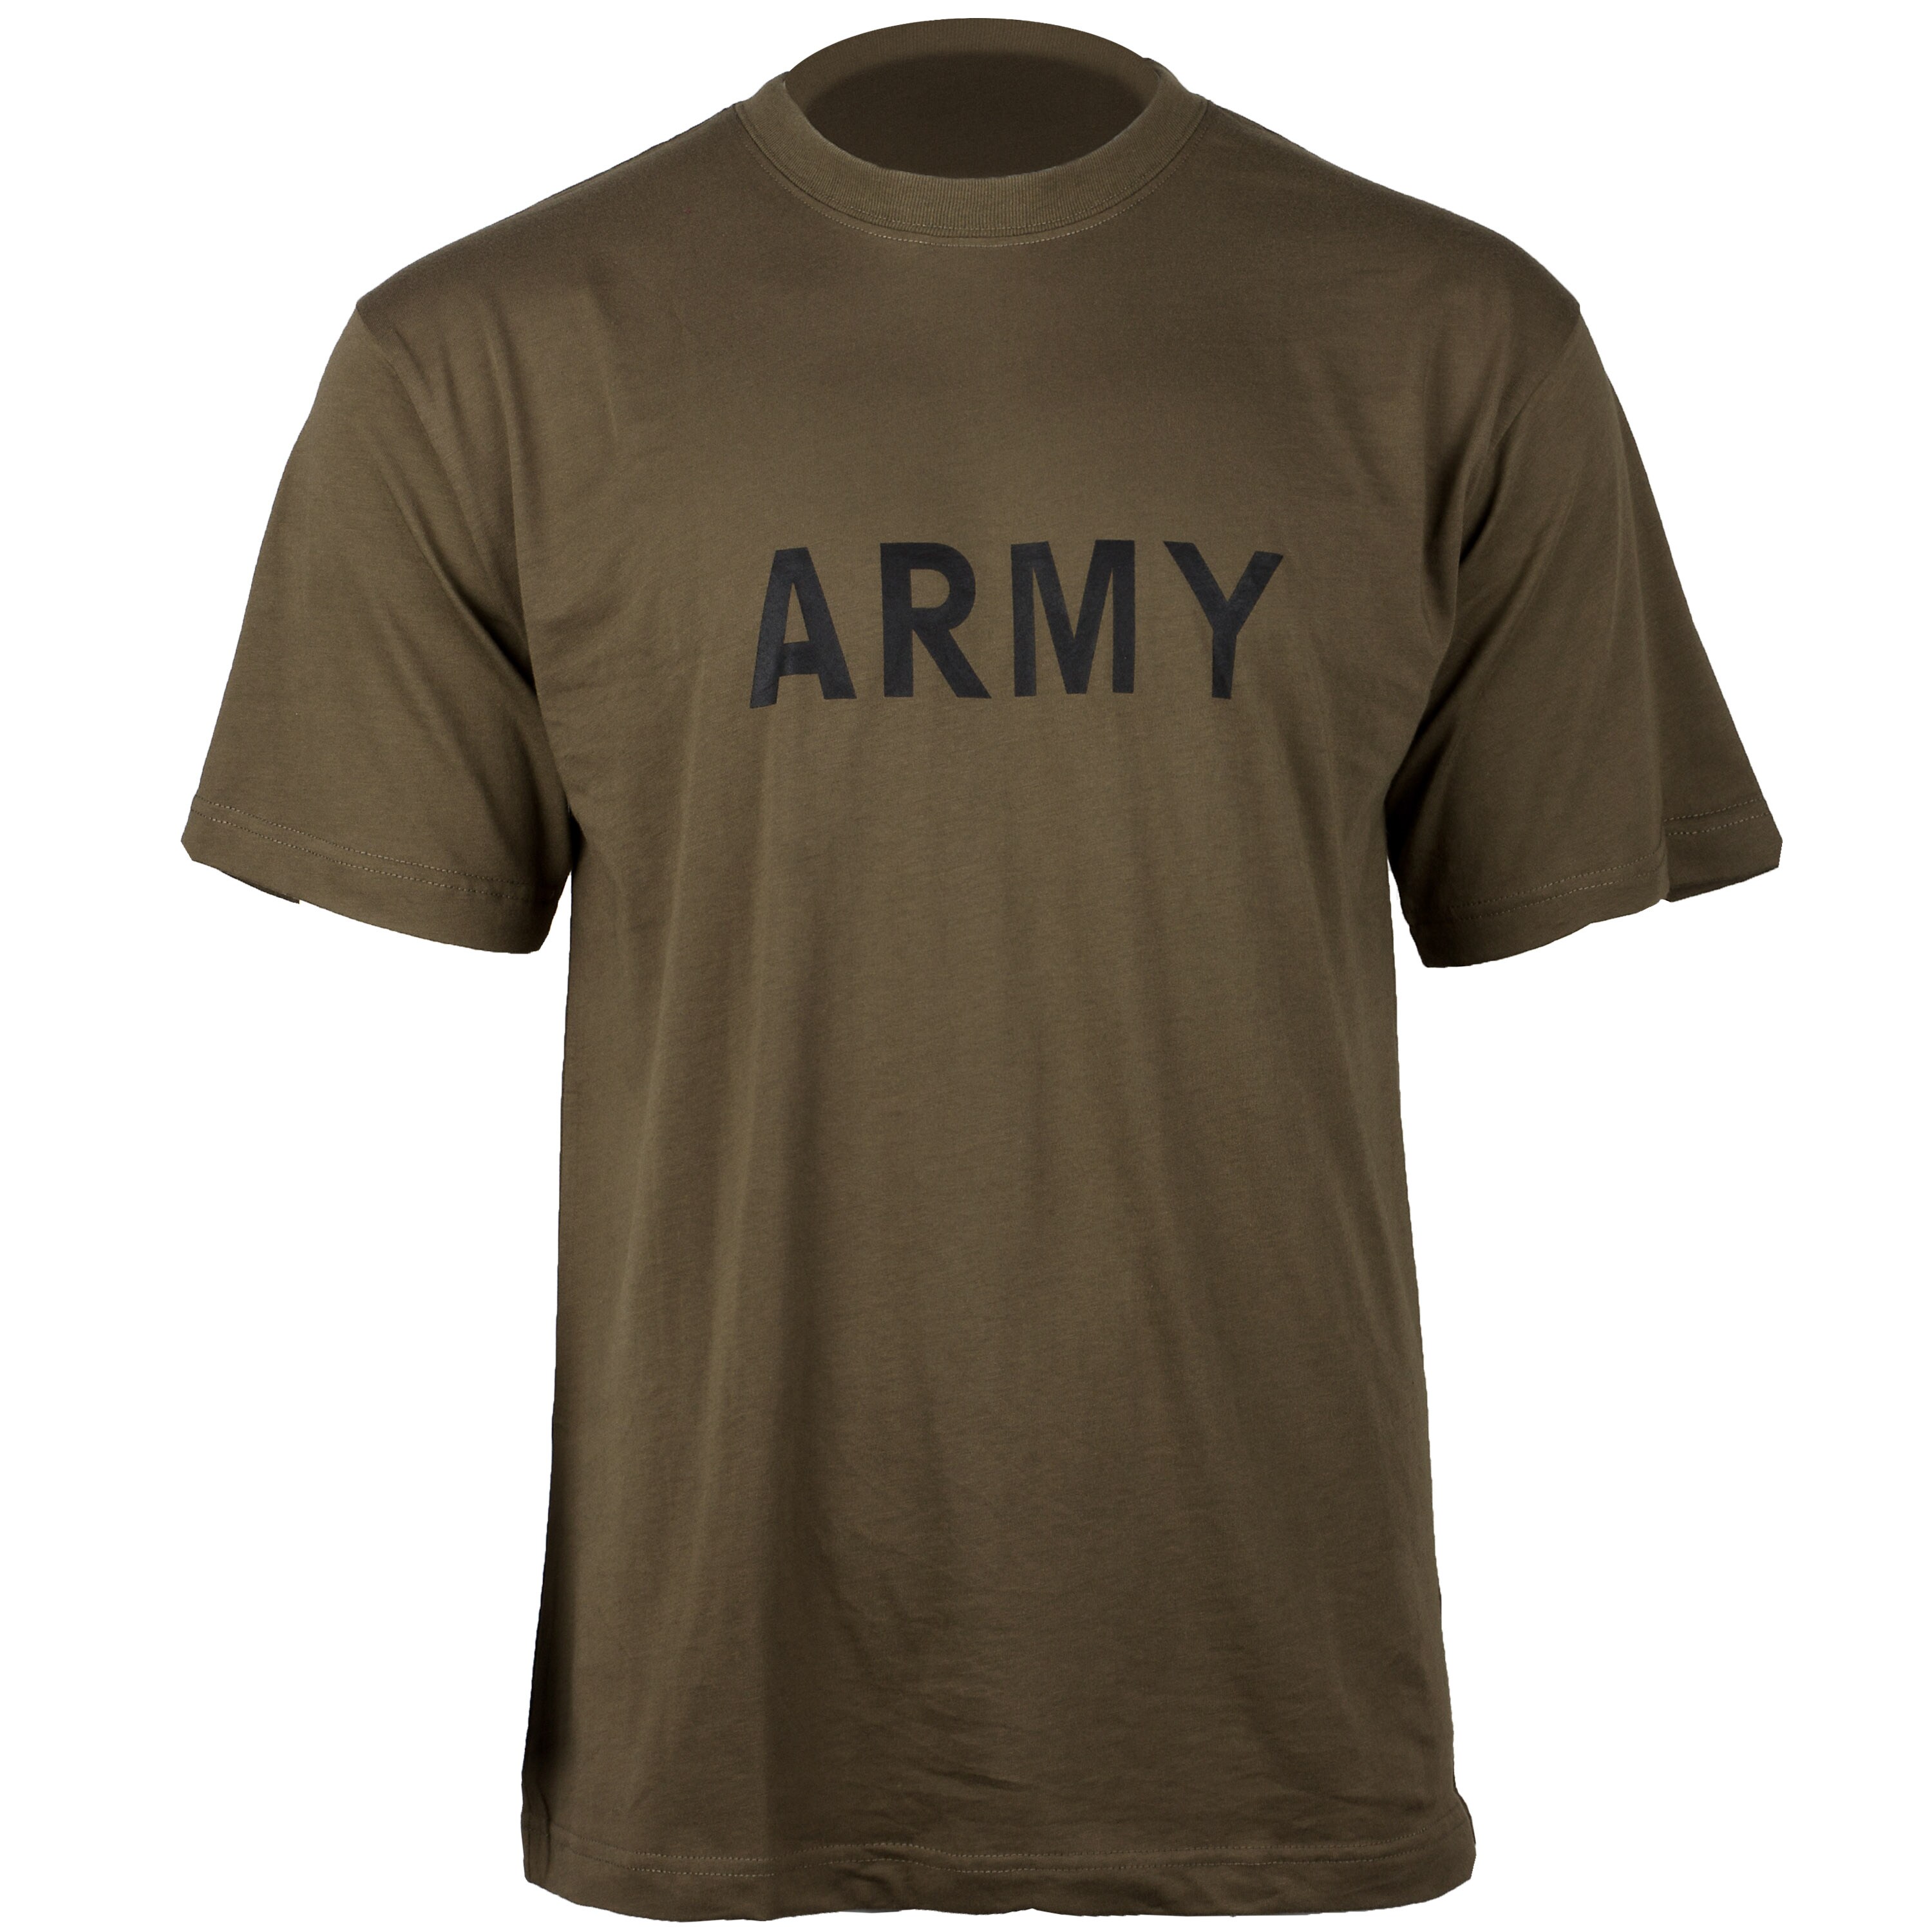 Purchase the MFH T-Shirt ARMY olive by ASMC